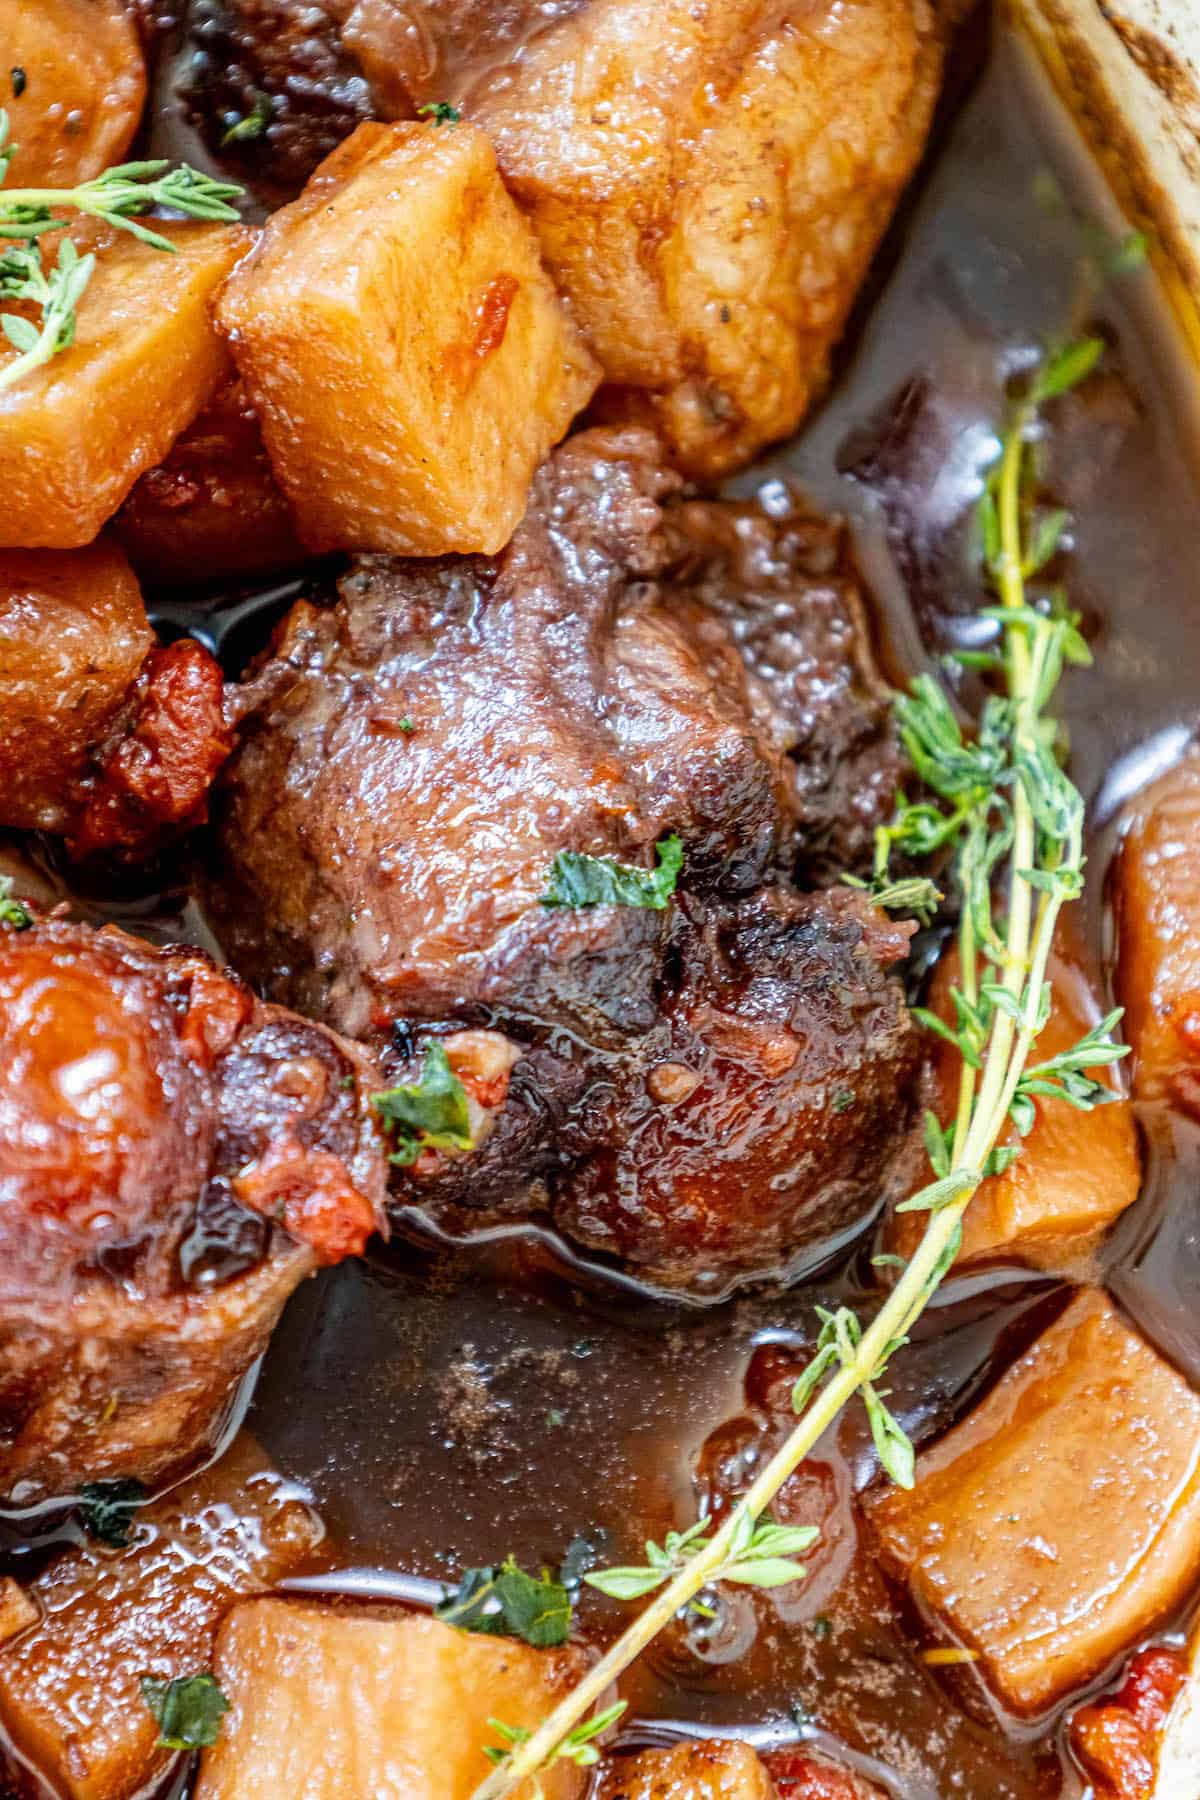 A Roasted Oxtail Stew with meat, potatoes, and sprigs of thyme.